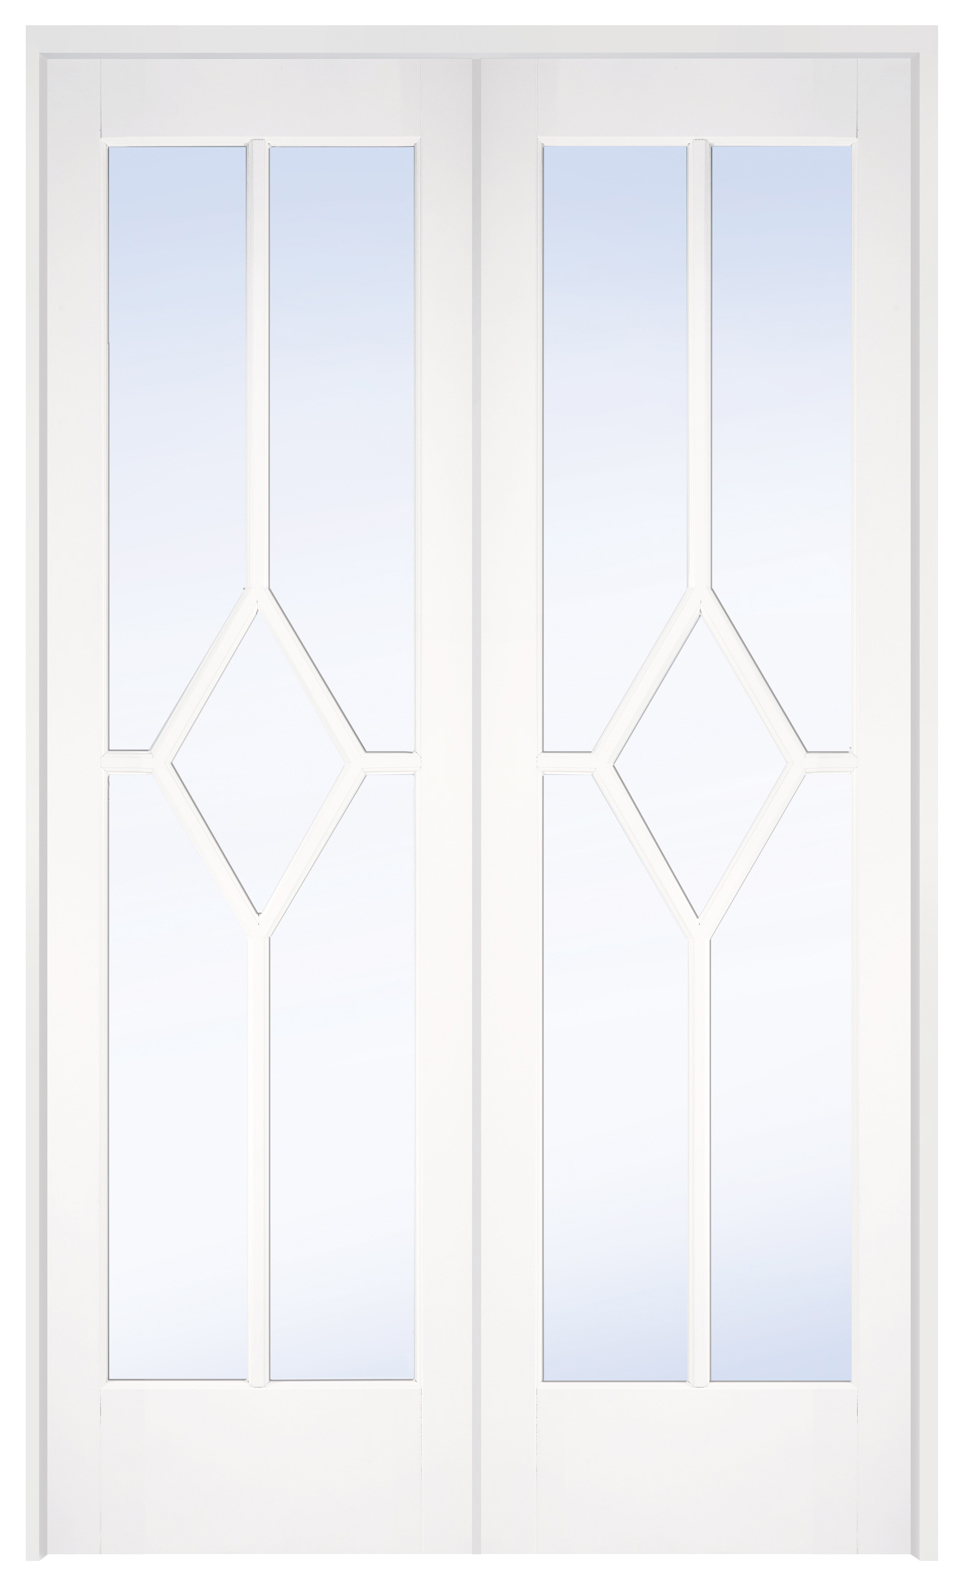 Image of LPD Internal Reims Room Divider W4 Primed White Solid Core Door - 1246 x 2031mm